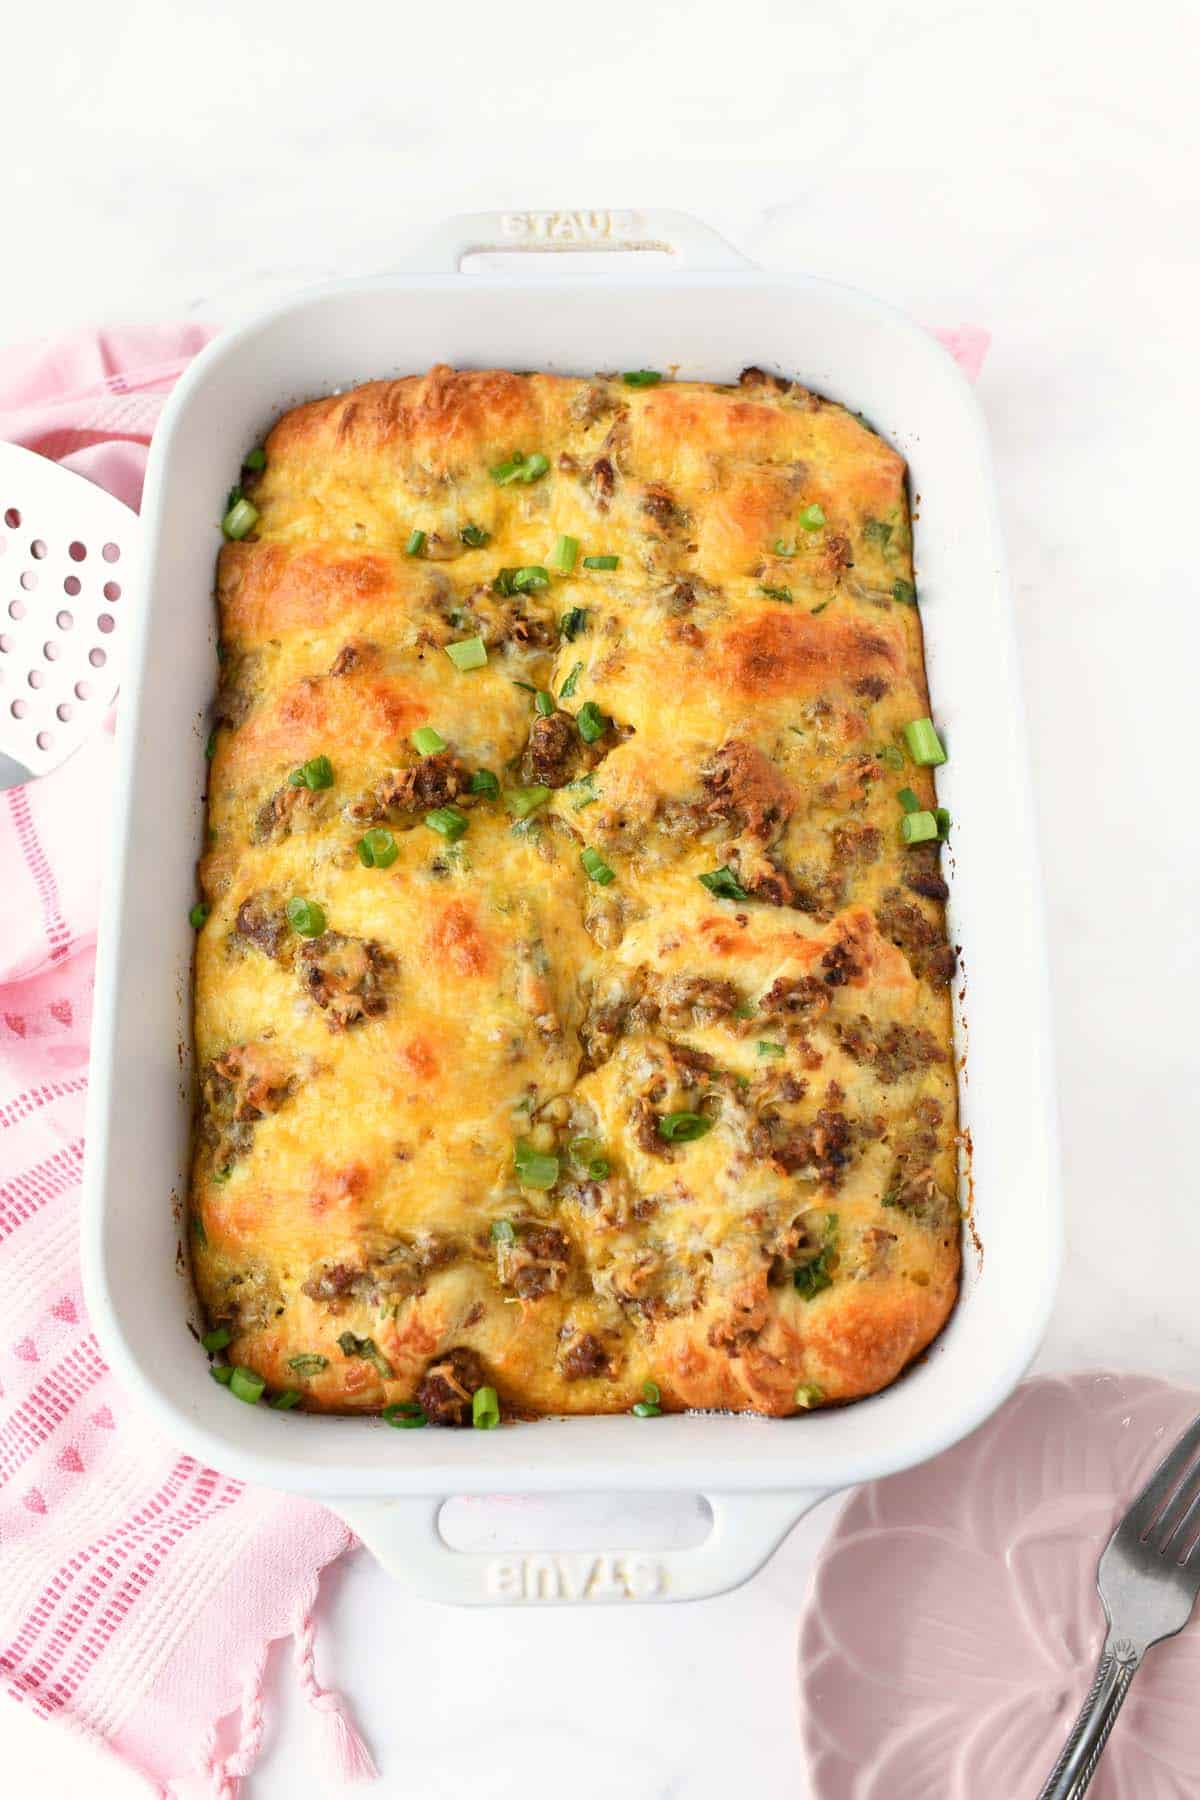 A baked sausage crescent casserole in a white baking dish.